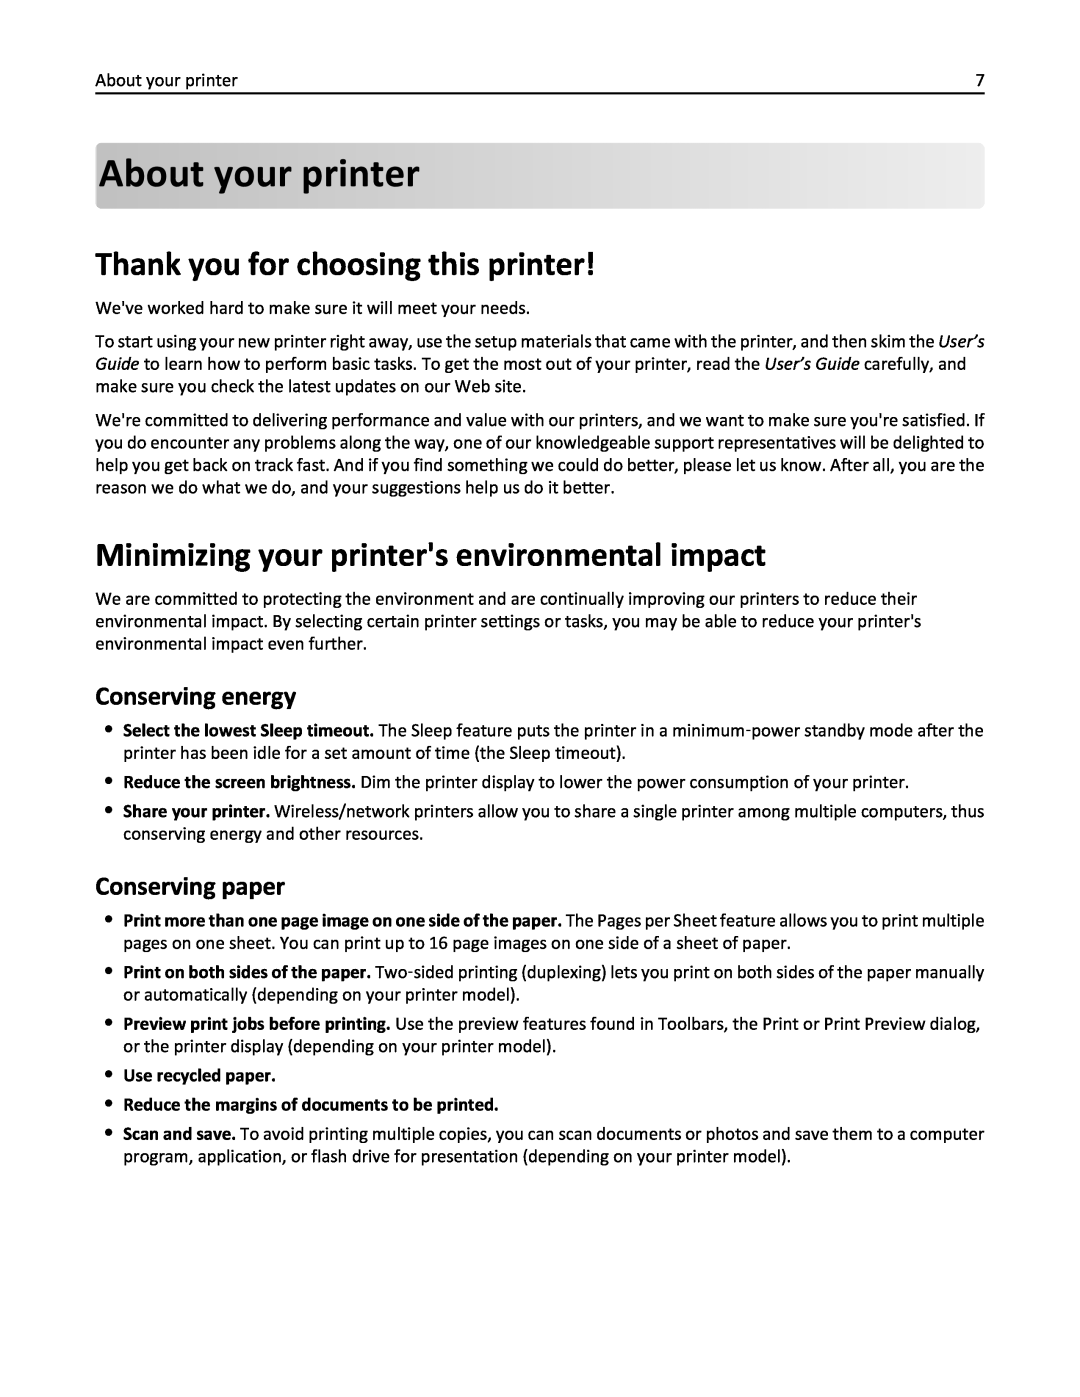 Lexmark 200, 20E About your printer, Thank you for choosing this printer, Minimizing your printers environmental impact 